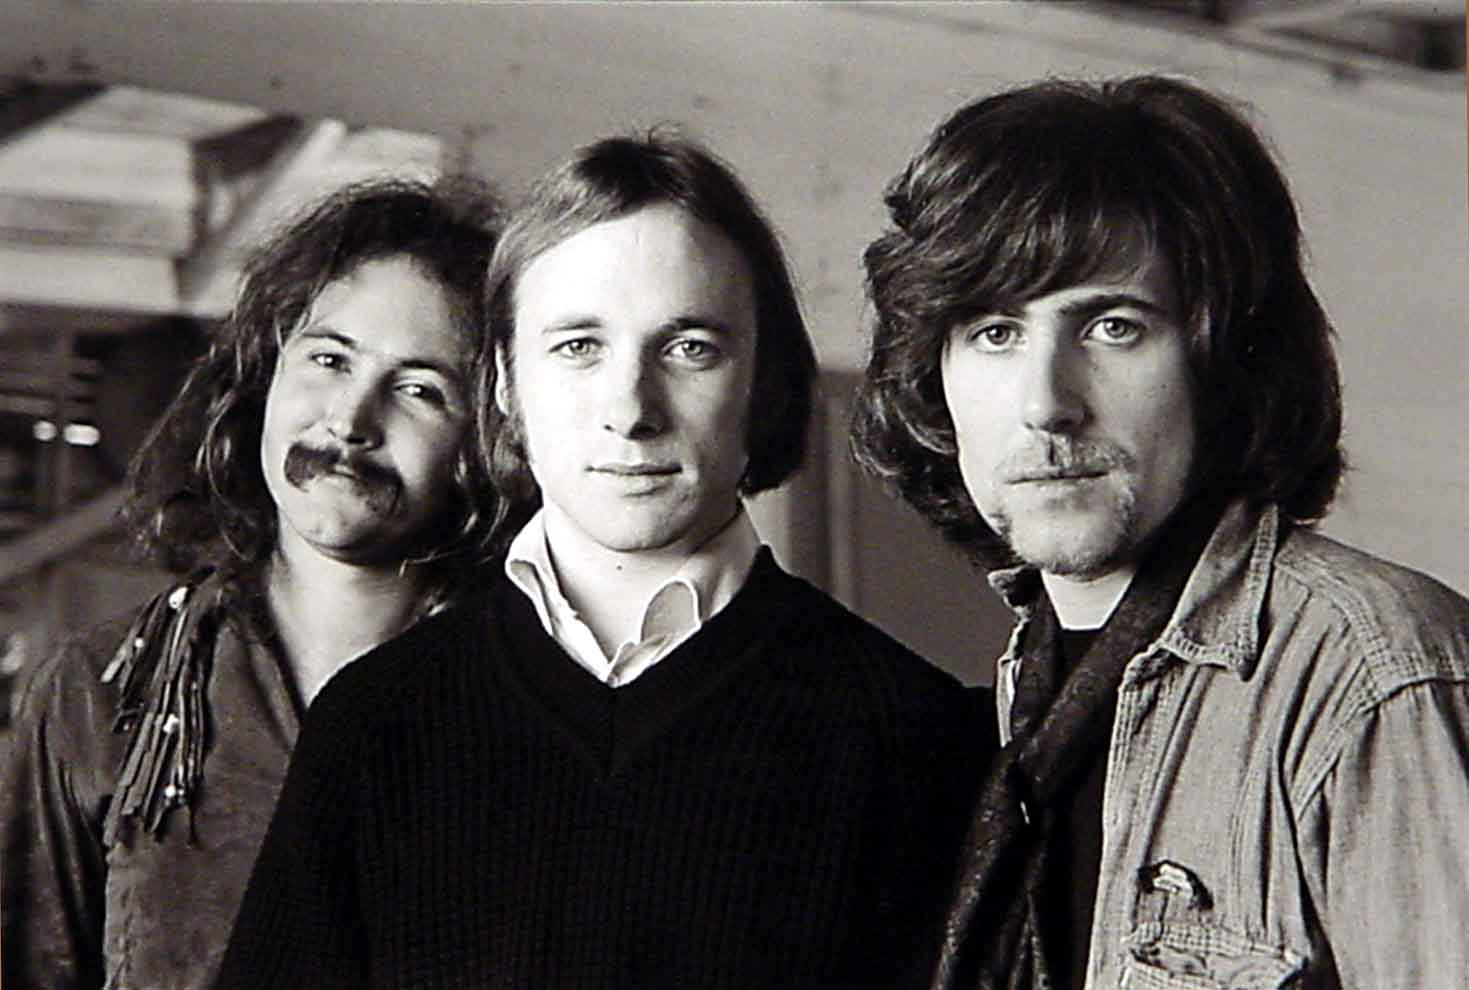 2-or-3-lines-and-so-much-more-crosby-stills-nash-young